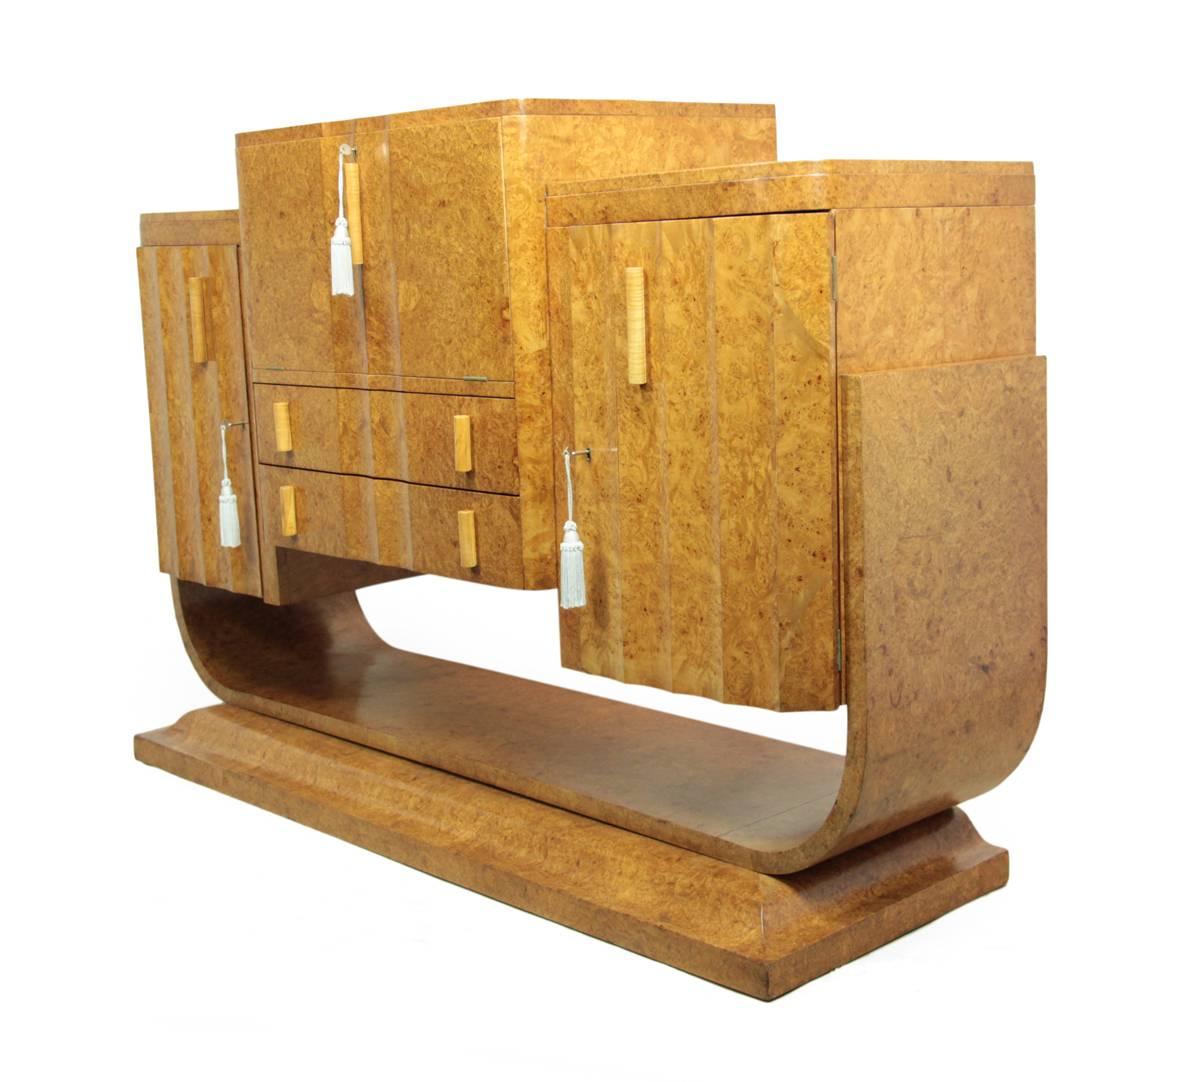 Art Deco walnut cocktail sideboard.
Sitting on a U-shaped base this Epstein brothers' sideboard was constructed in 1930s in London. It has fluted cupboards to the left and right and a pop up cocktail bar in the center, with two drawers below this